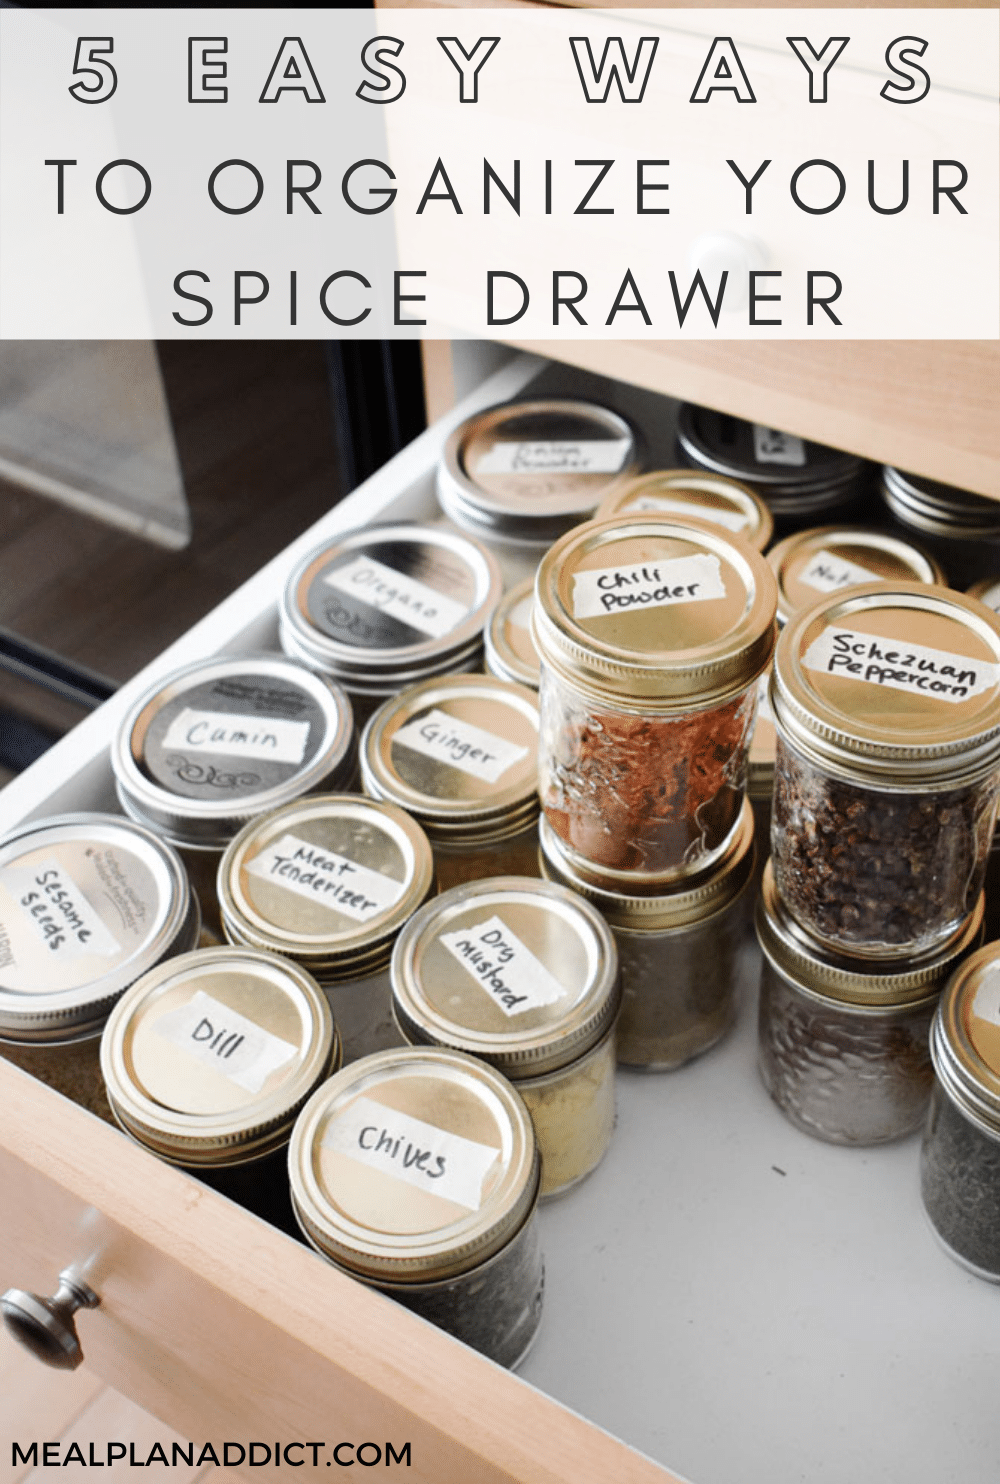 Spice drawer organization pin for Pinterest